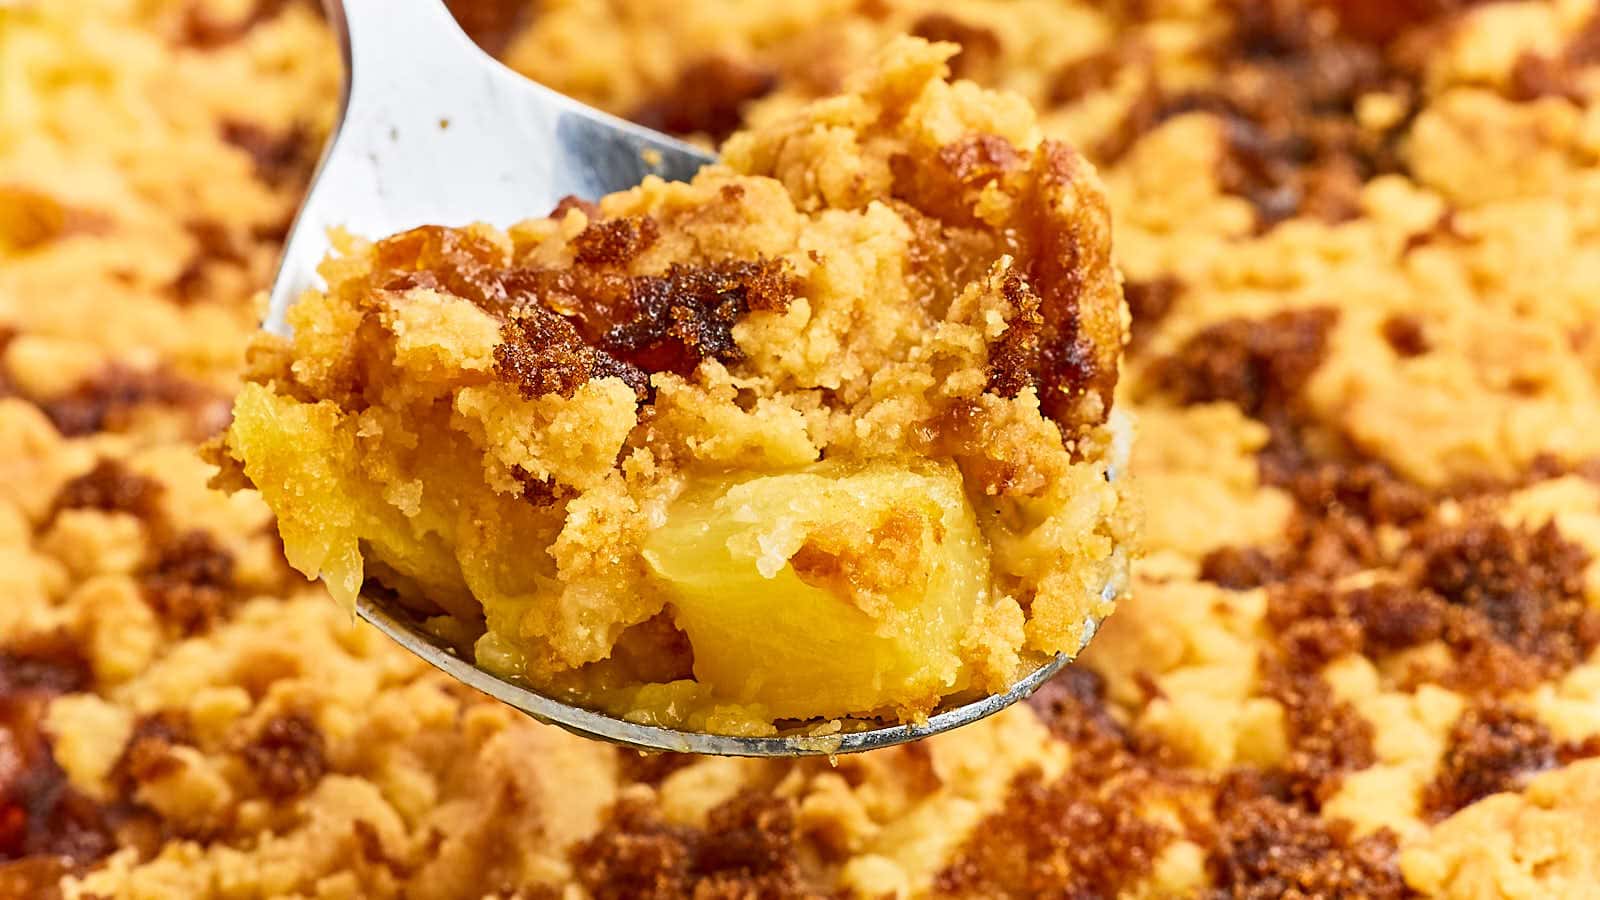 Indulge in a taste of the tropics with this simple and delicious Pineapple Dump Cake recipe, featuring layers of juicy pineapple, moist cake, and a buttery crumble topping that's sure to satisfy any sweet tooth. #cheerfulcook #pineappledumpcake #dumpcakerecipe #dessert #pineapple #4ingredients